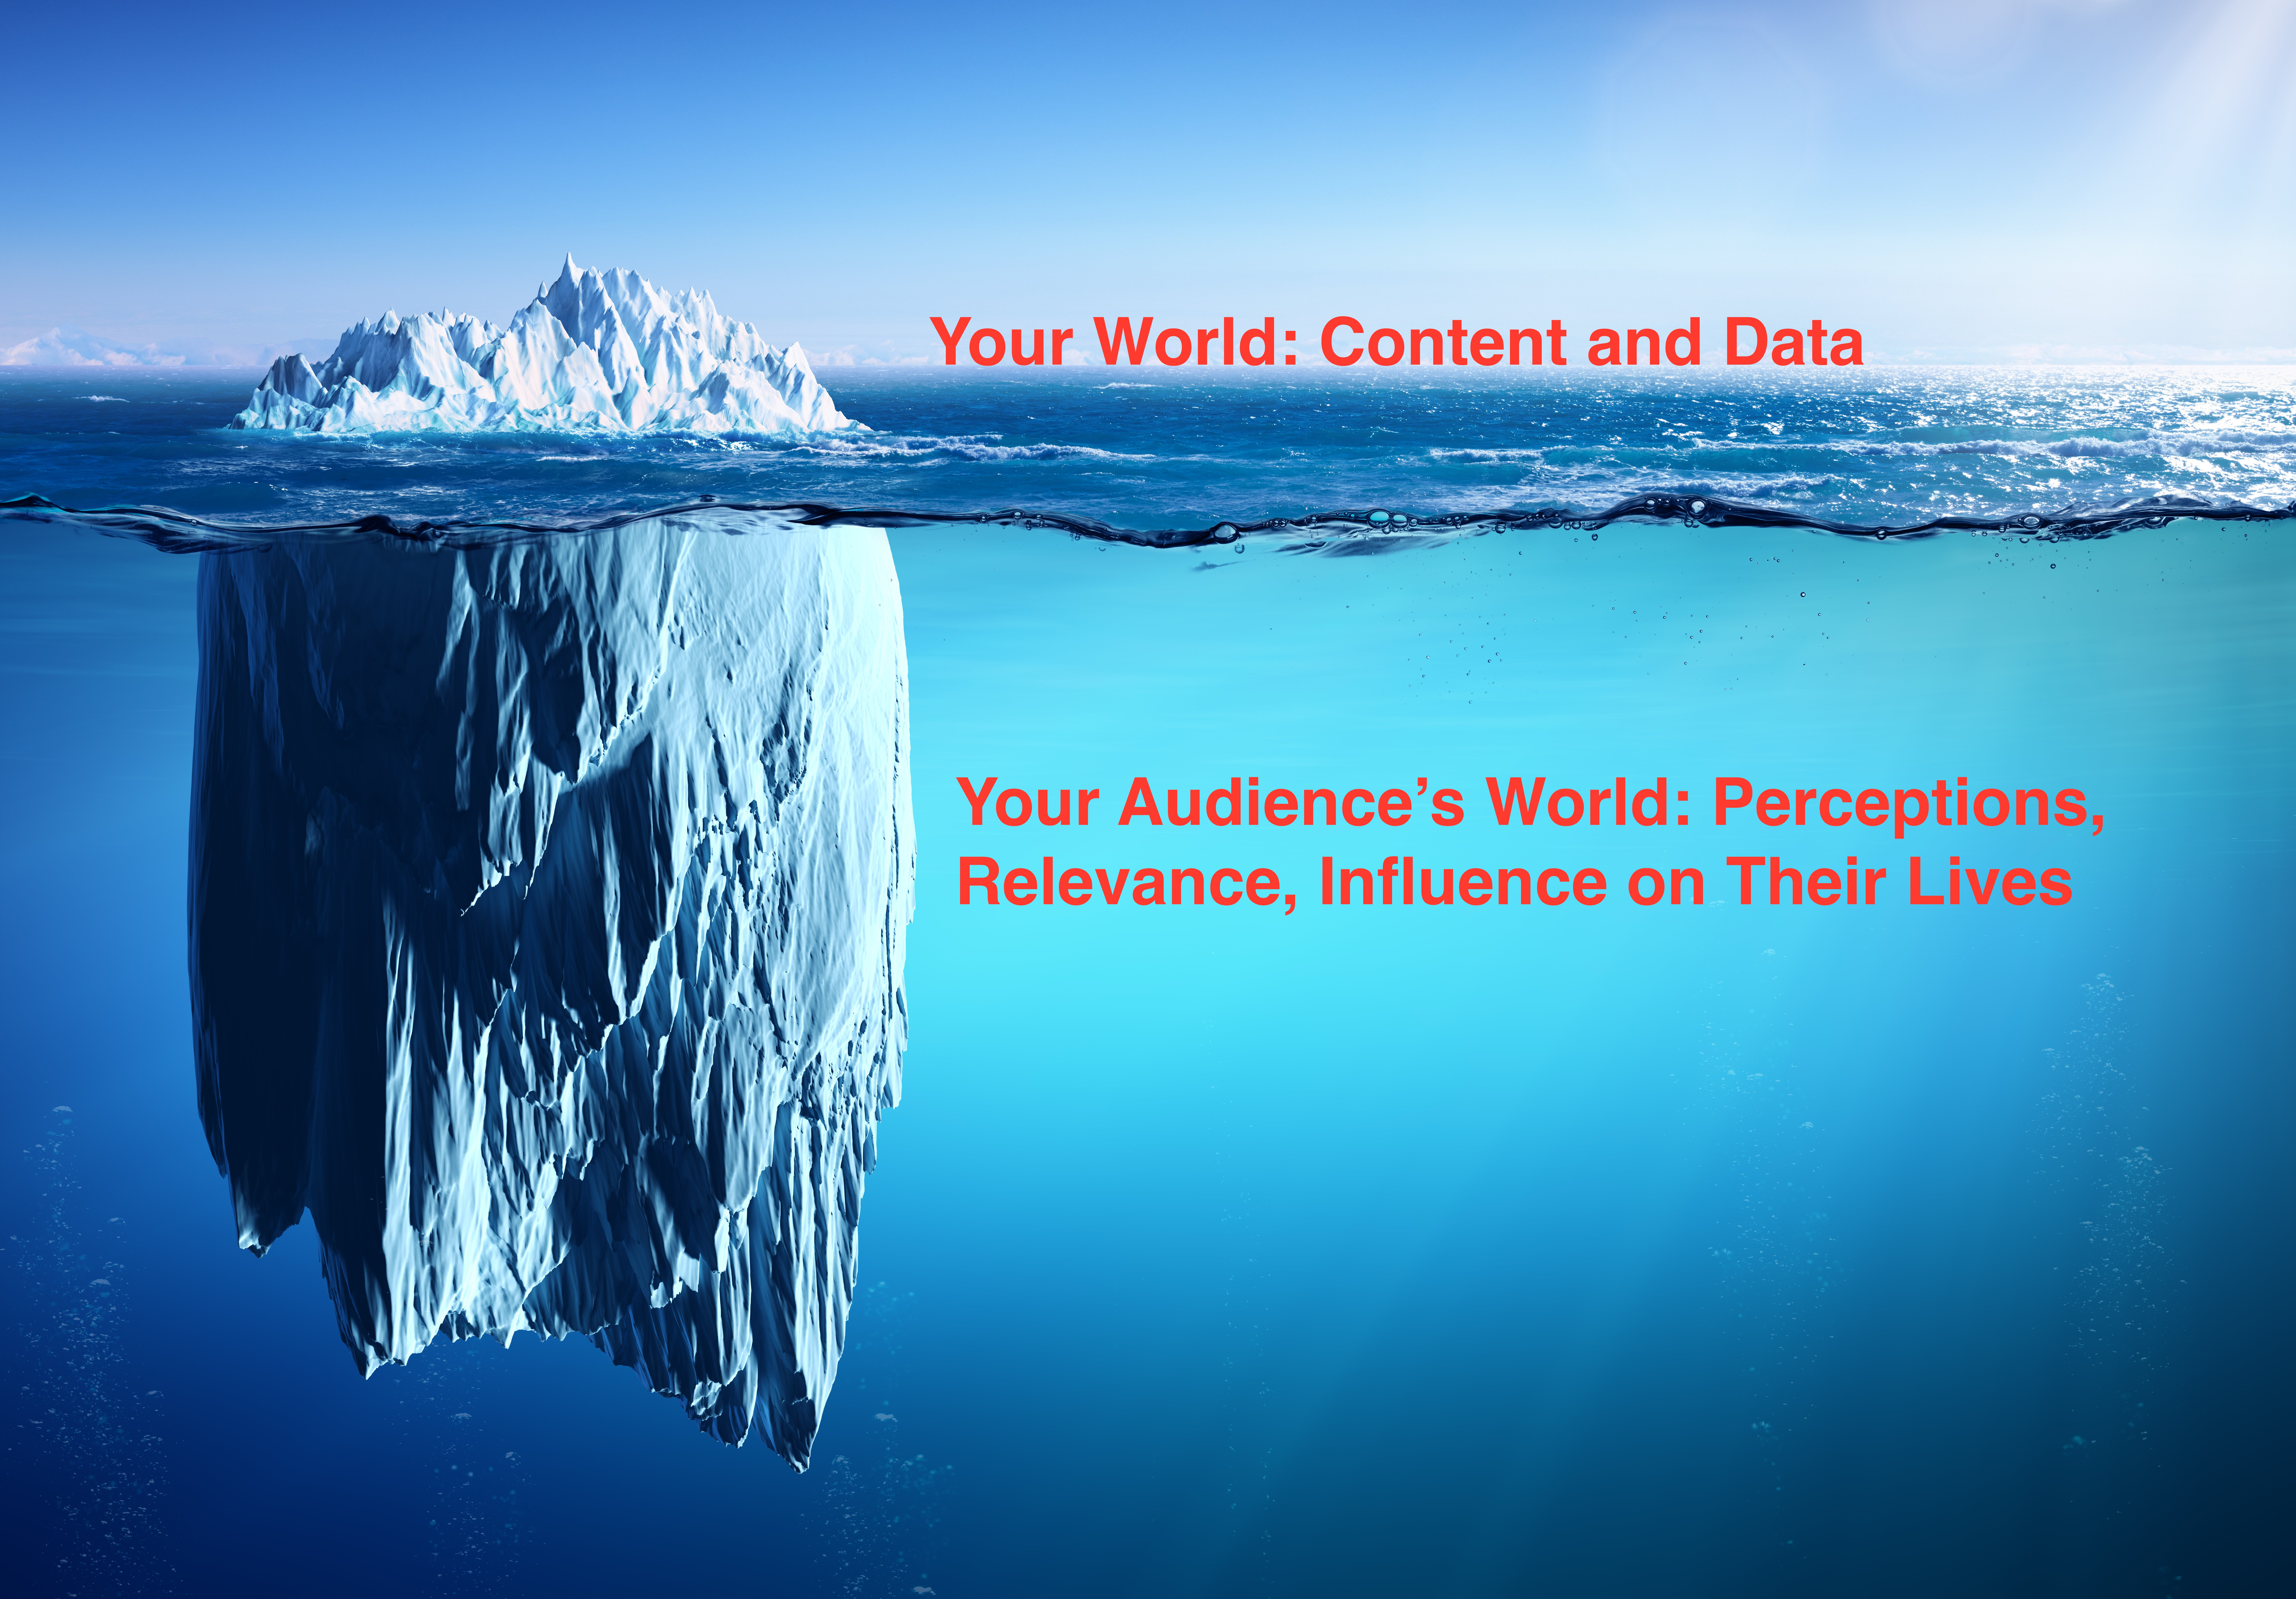 Illustration of an iceberg, showing how to engage and influence an audience.